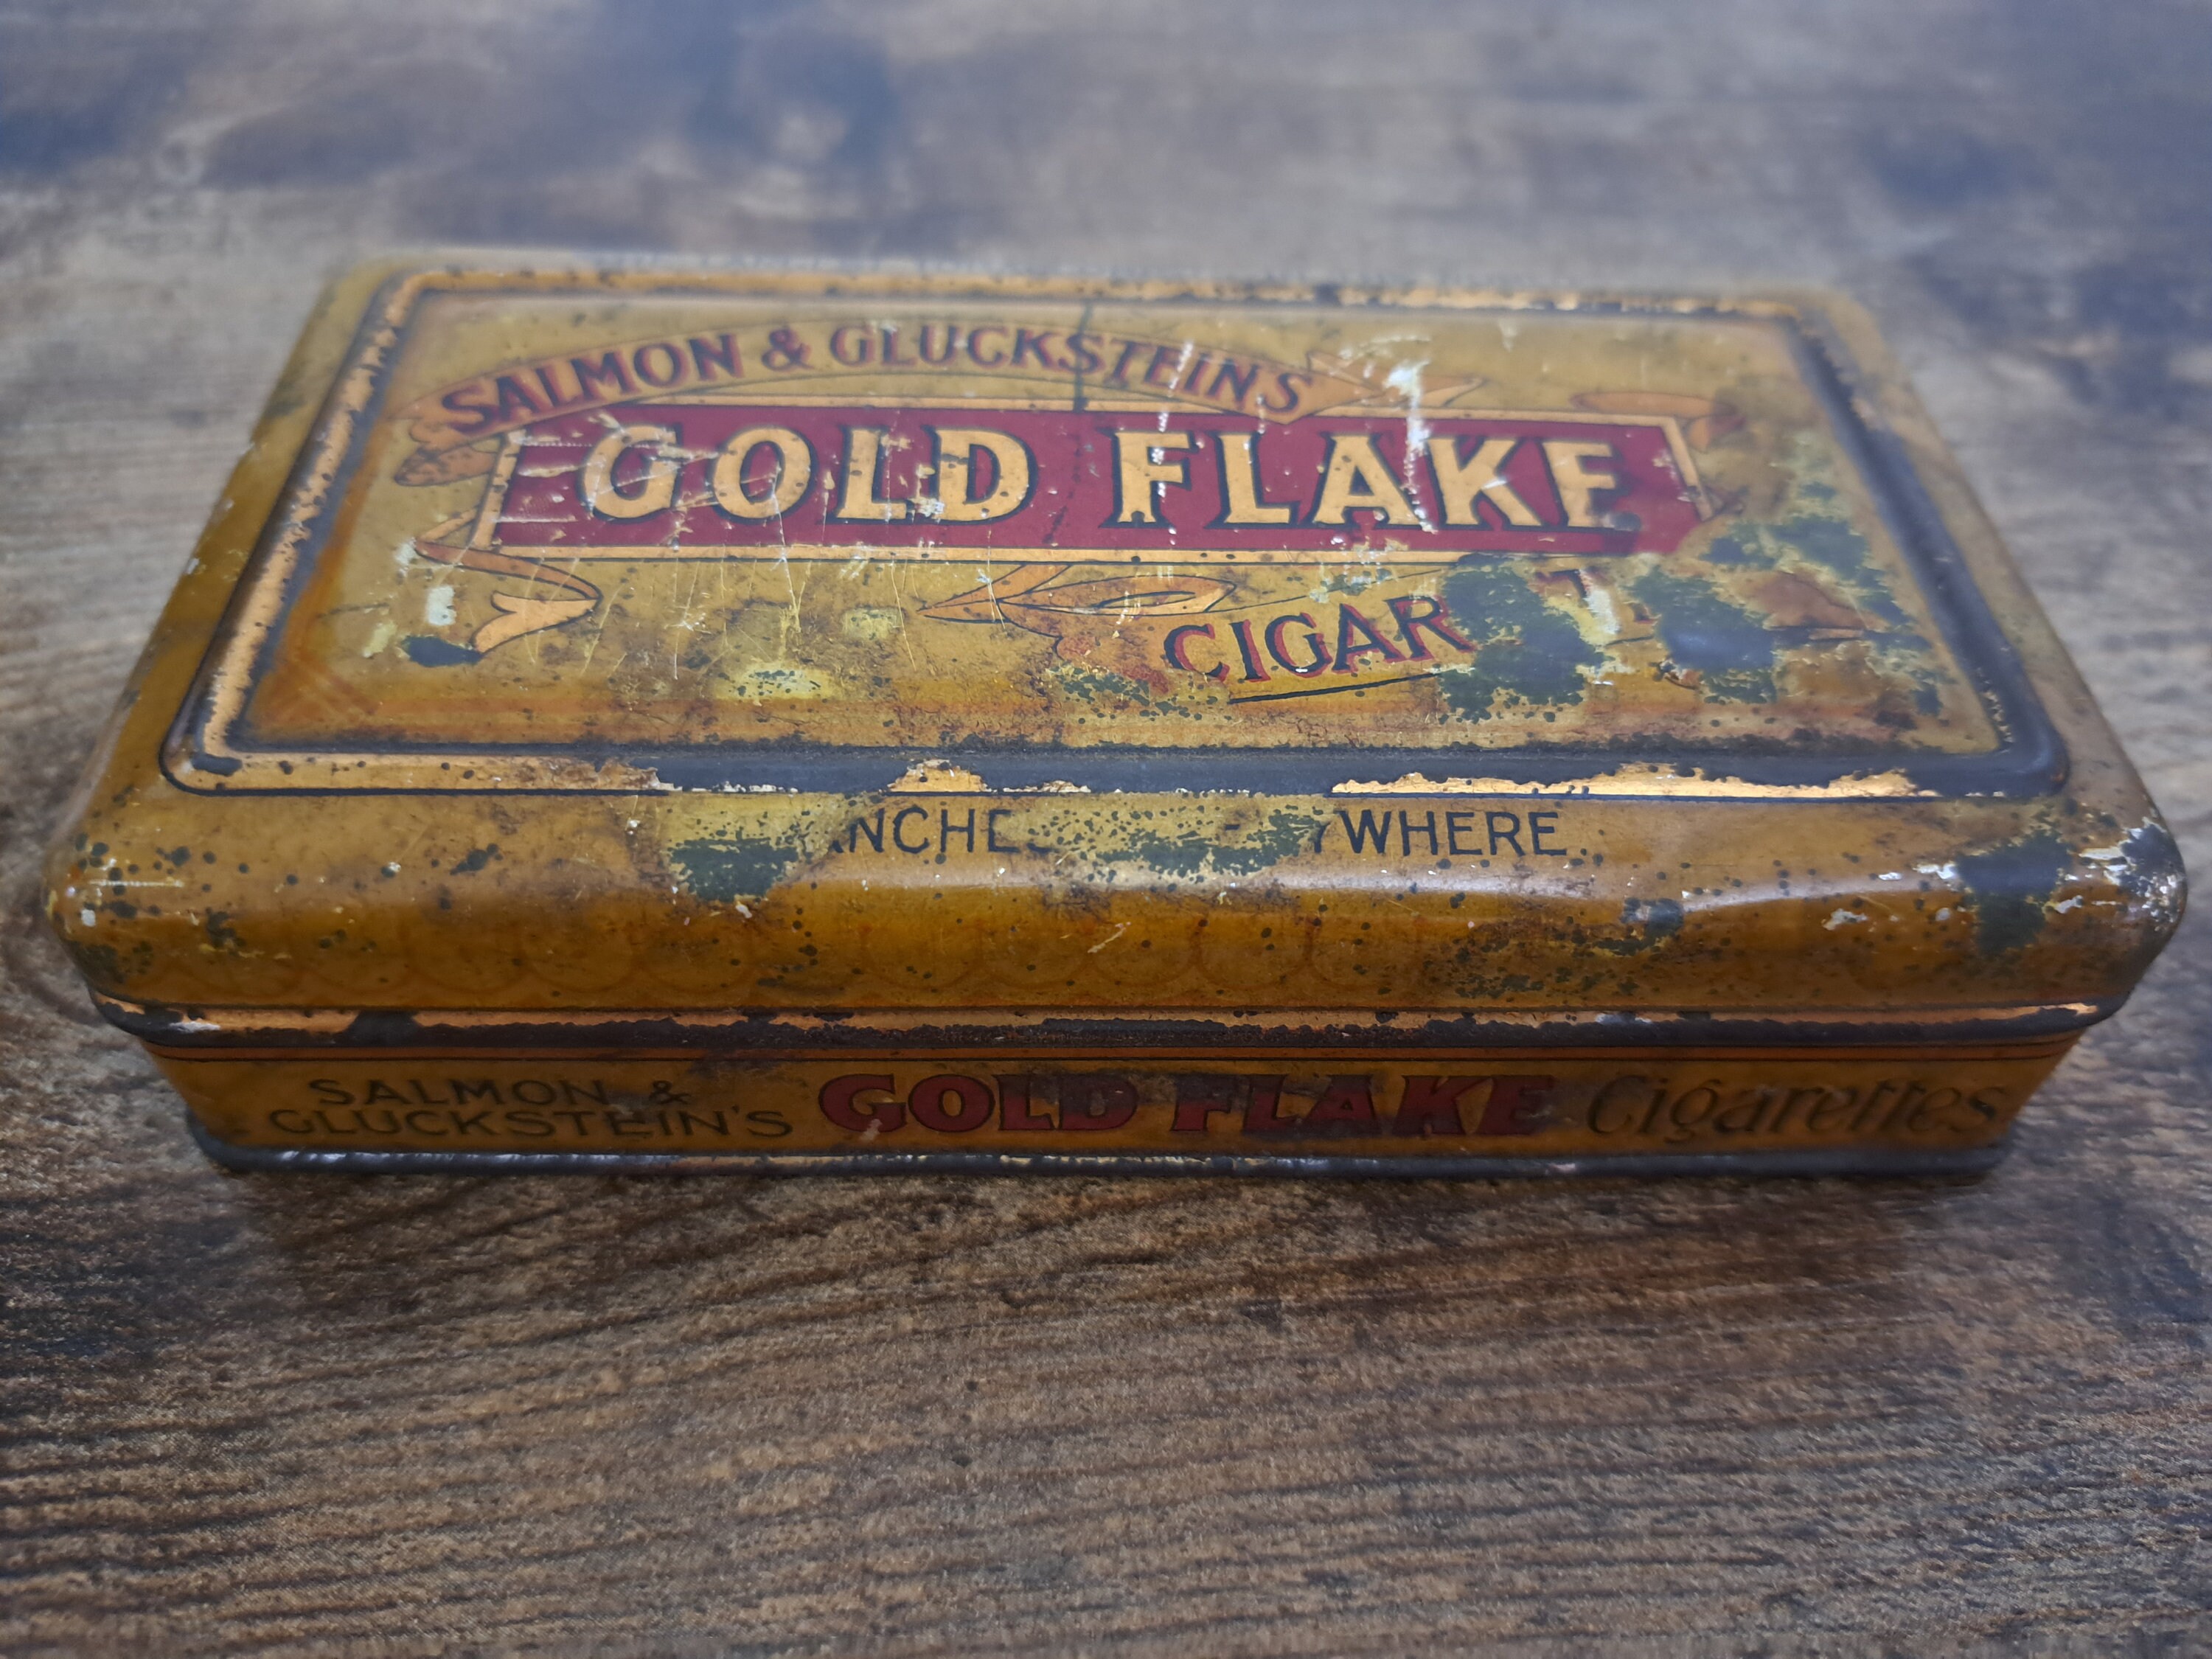 Gold Flake cigarettes at best price – Eden The Store